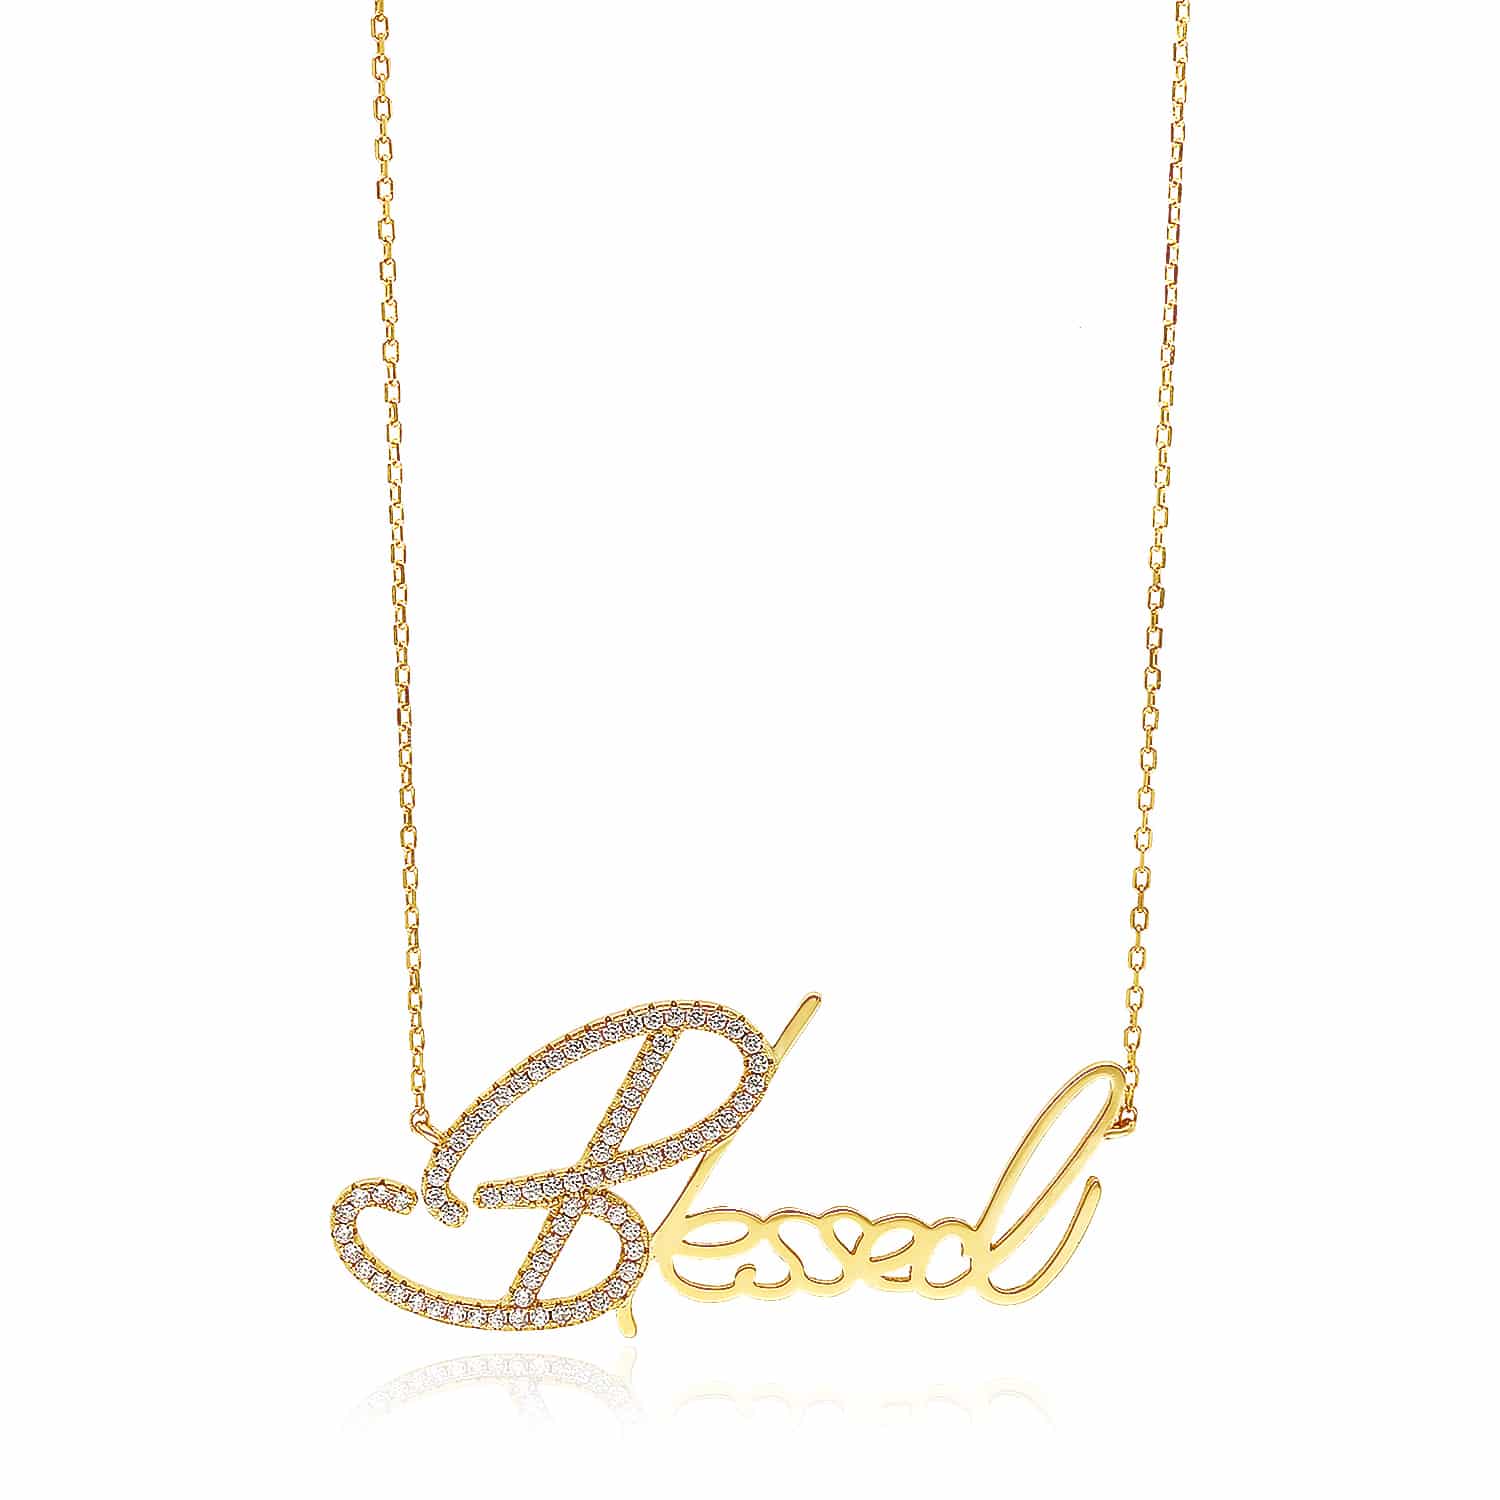 18K Gold Over Silver Simulated Diamond "Blessed" Pendant Necklace 16"-18" Adjus.